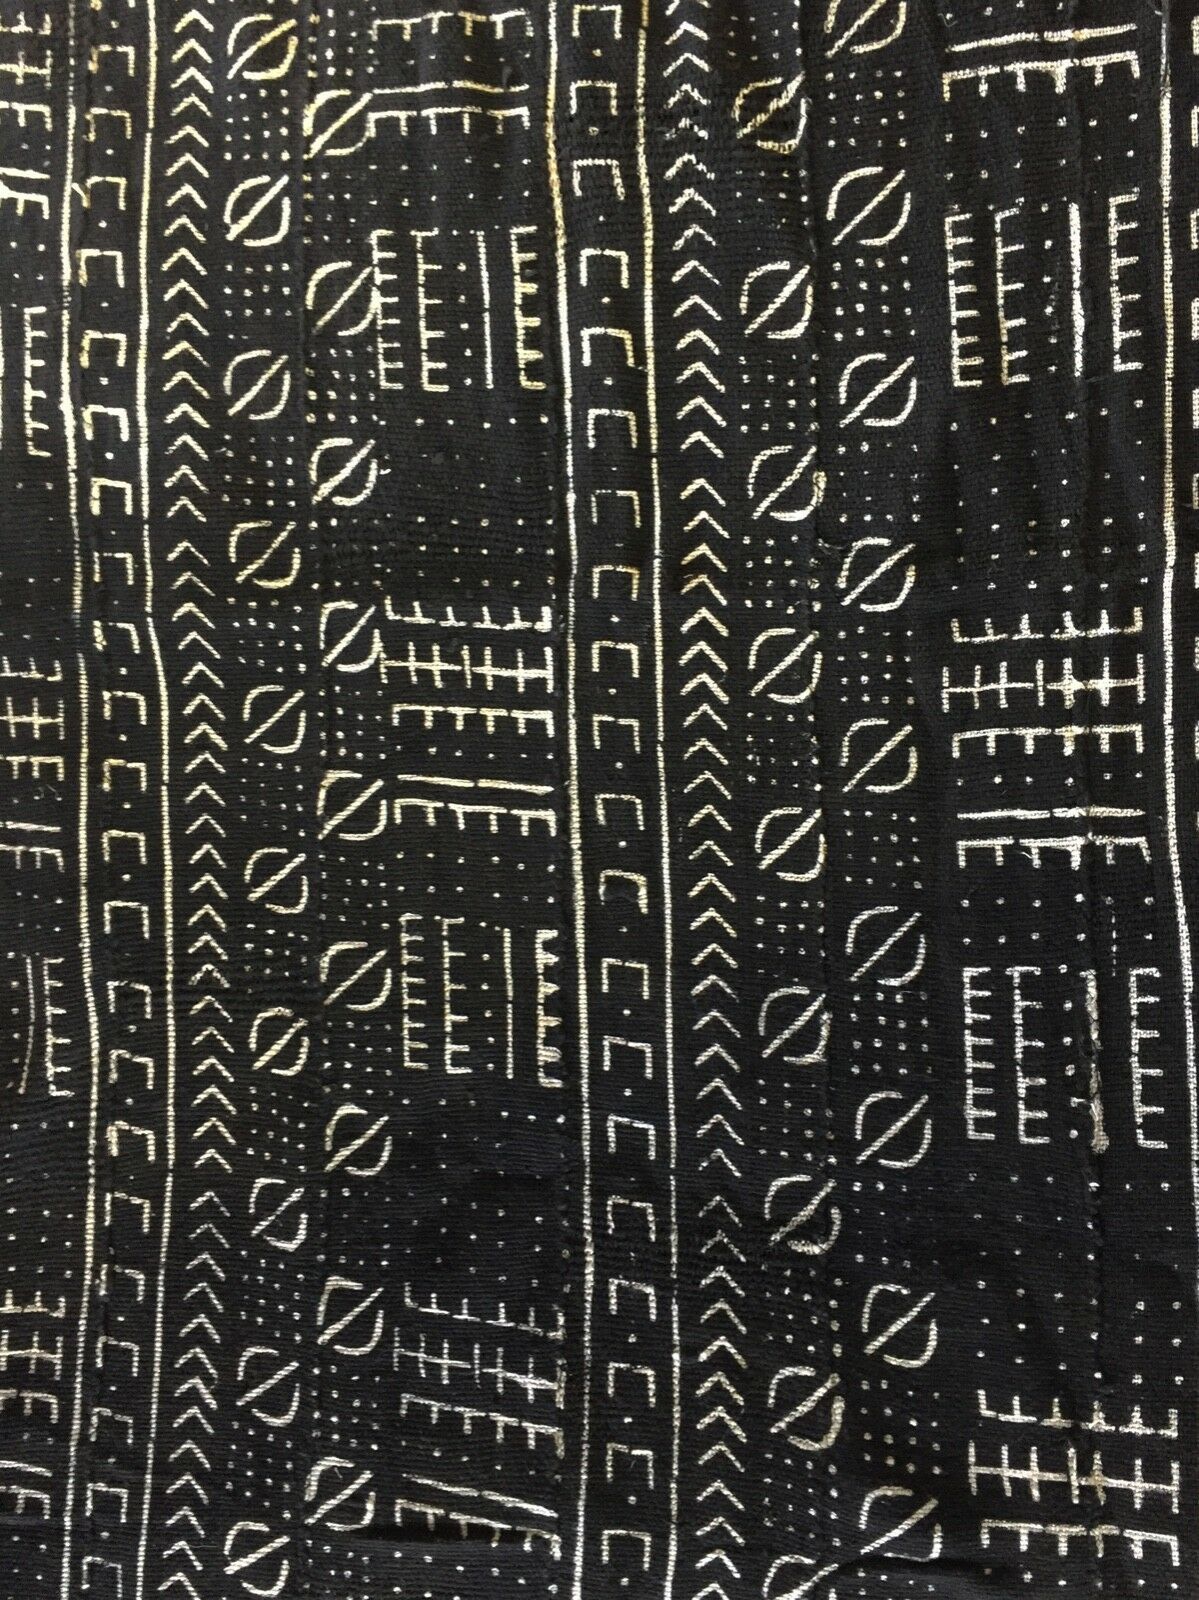 African Mali Black and White Mud Cloth Textile / PAIR 61" by 46" Pair # 1838